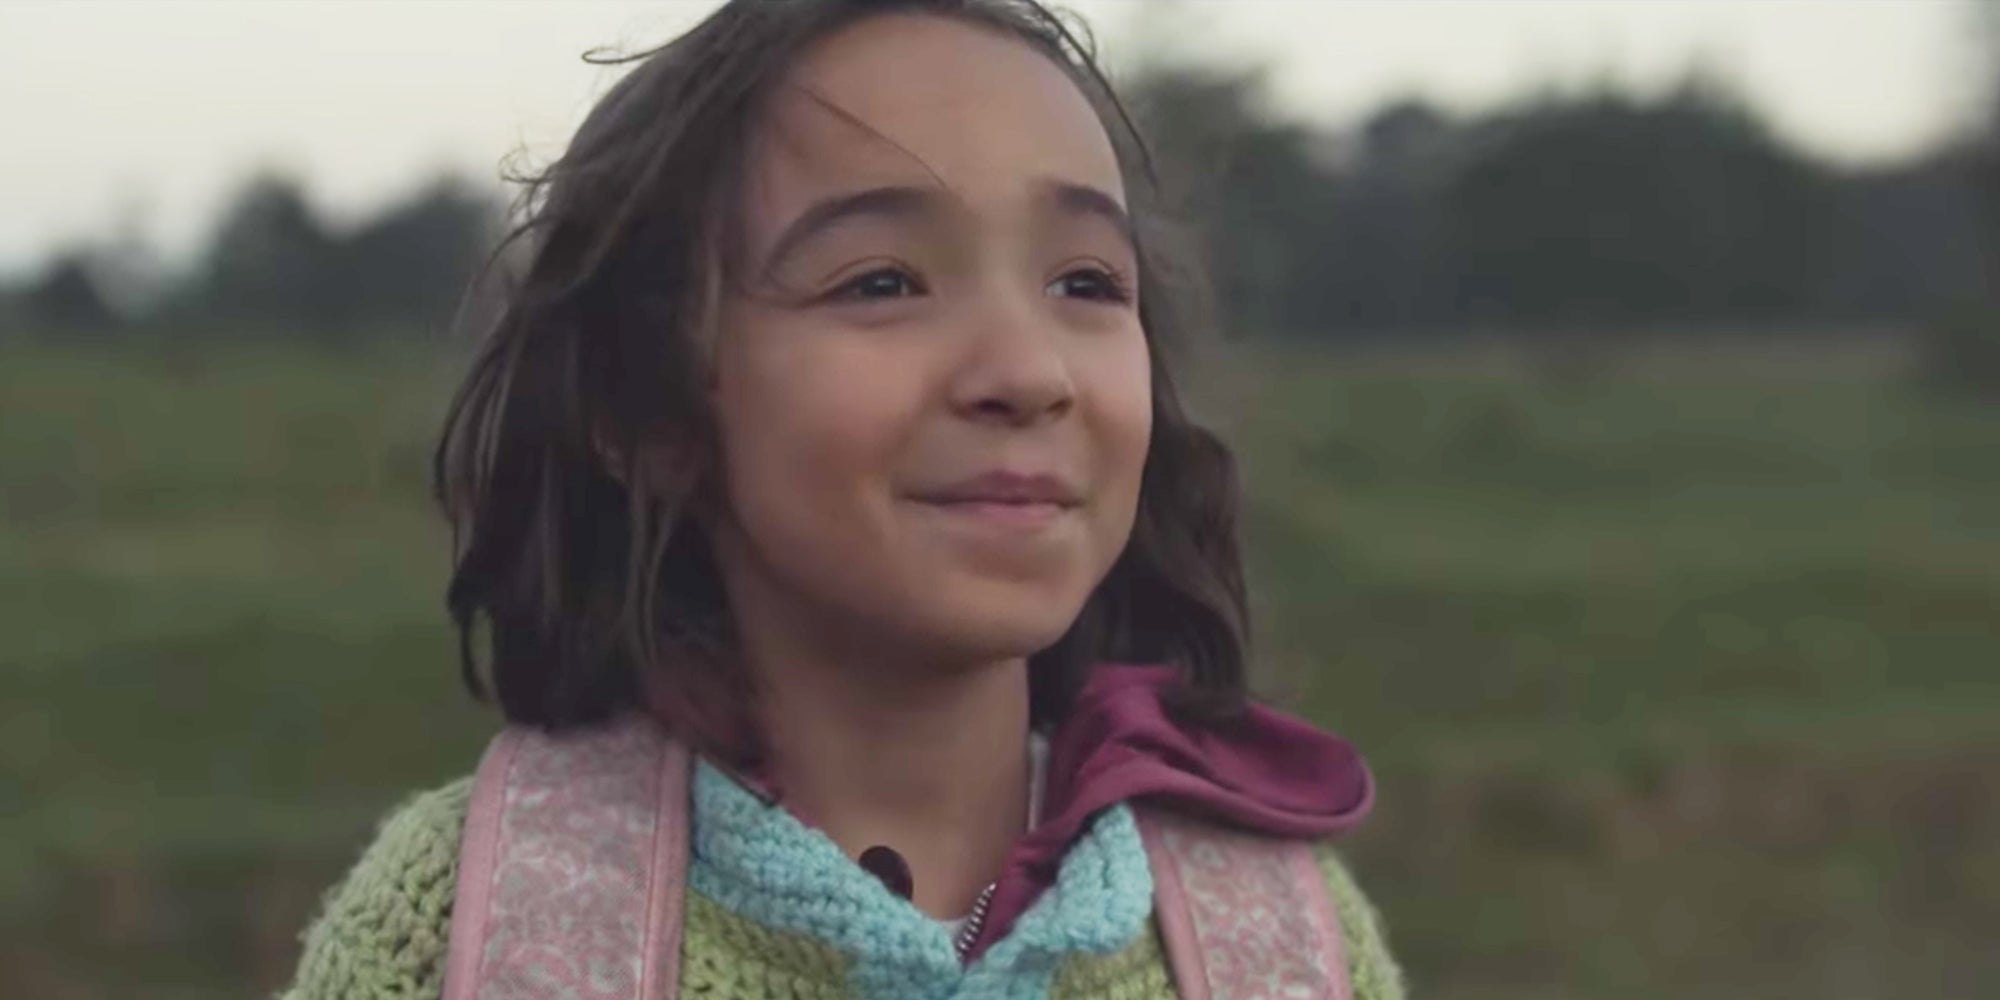 84 Lumber CEO Says Controversial Super Bowl Ad Was Not Pro-Immigration – and Trump’s Wall ‘Represents Security’